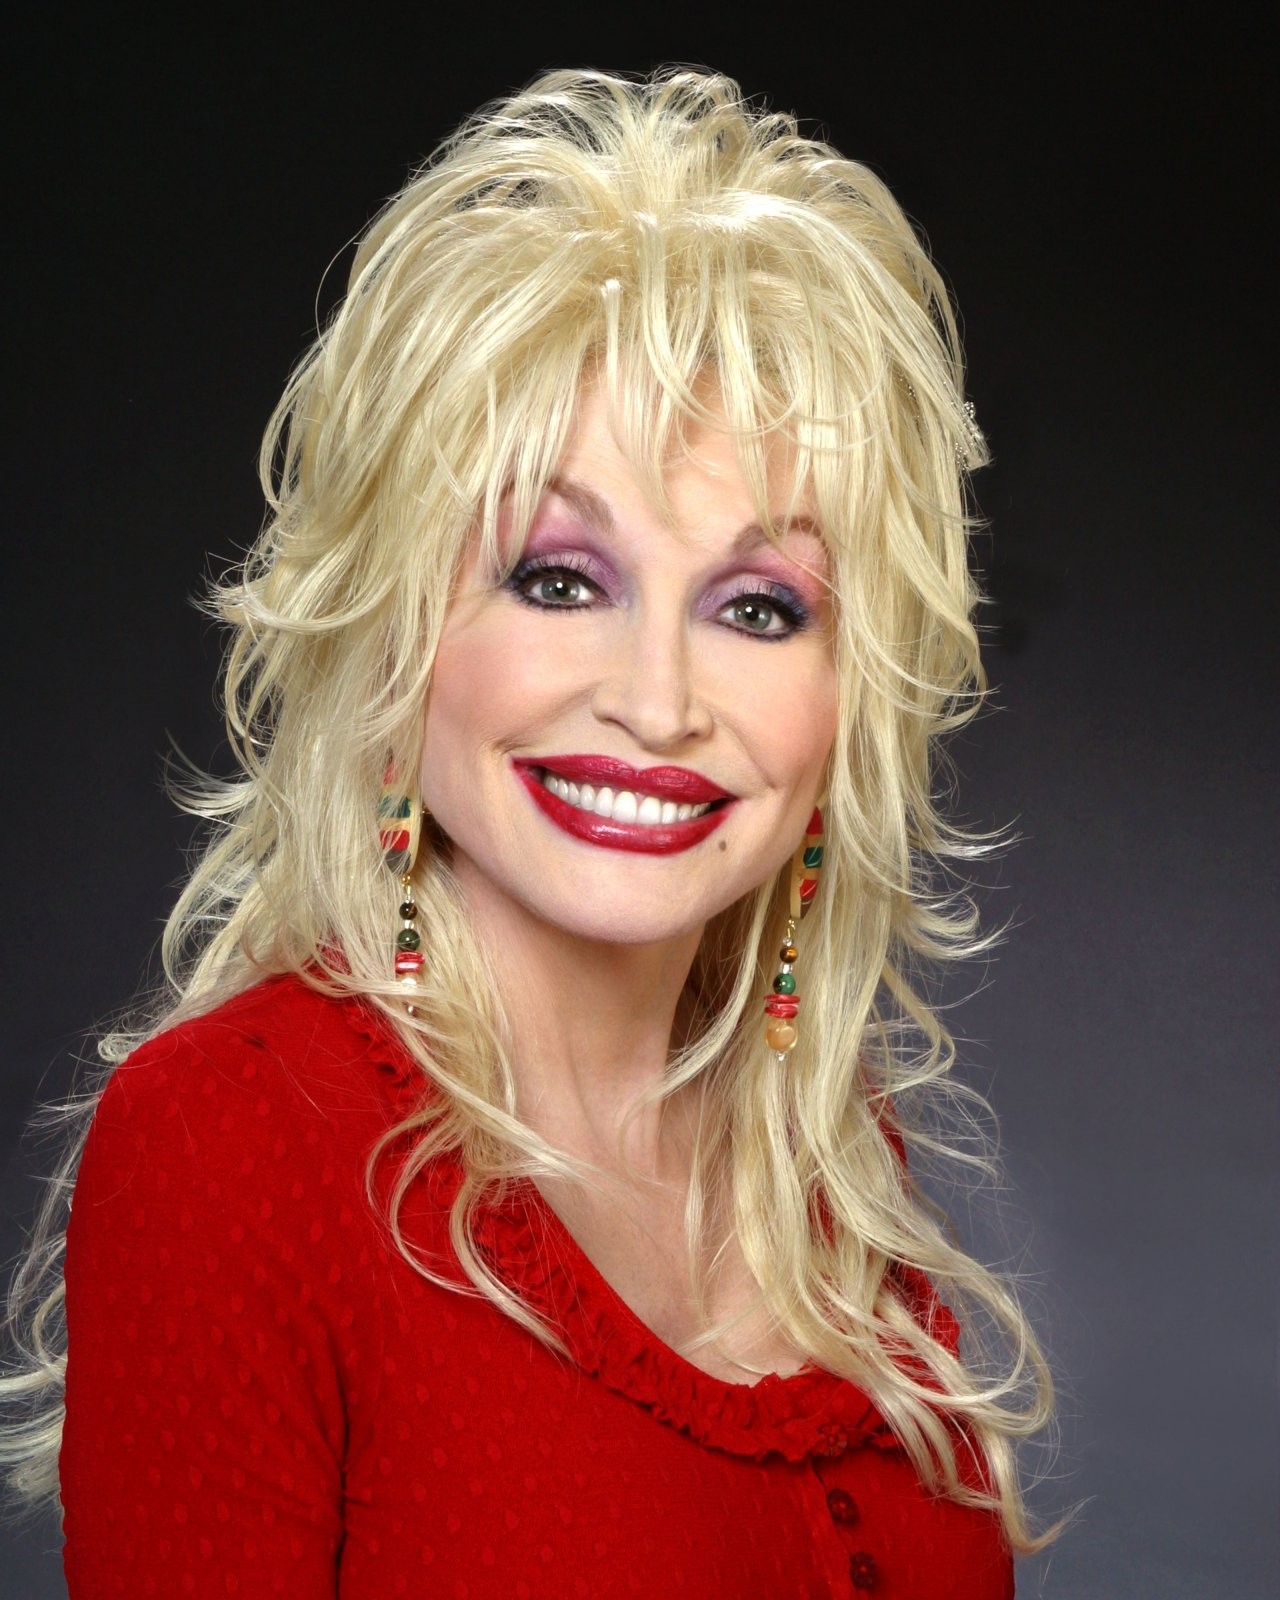 Bet You Didn’t Know Dolly Parton Ran A Program to Encourage Children to Read